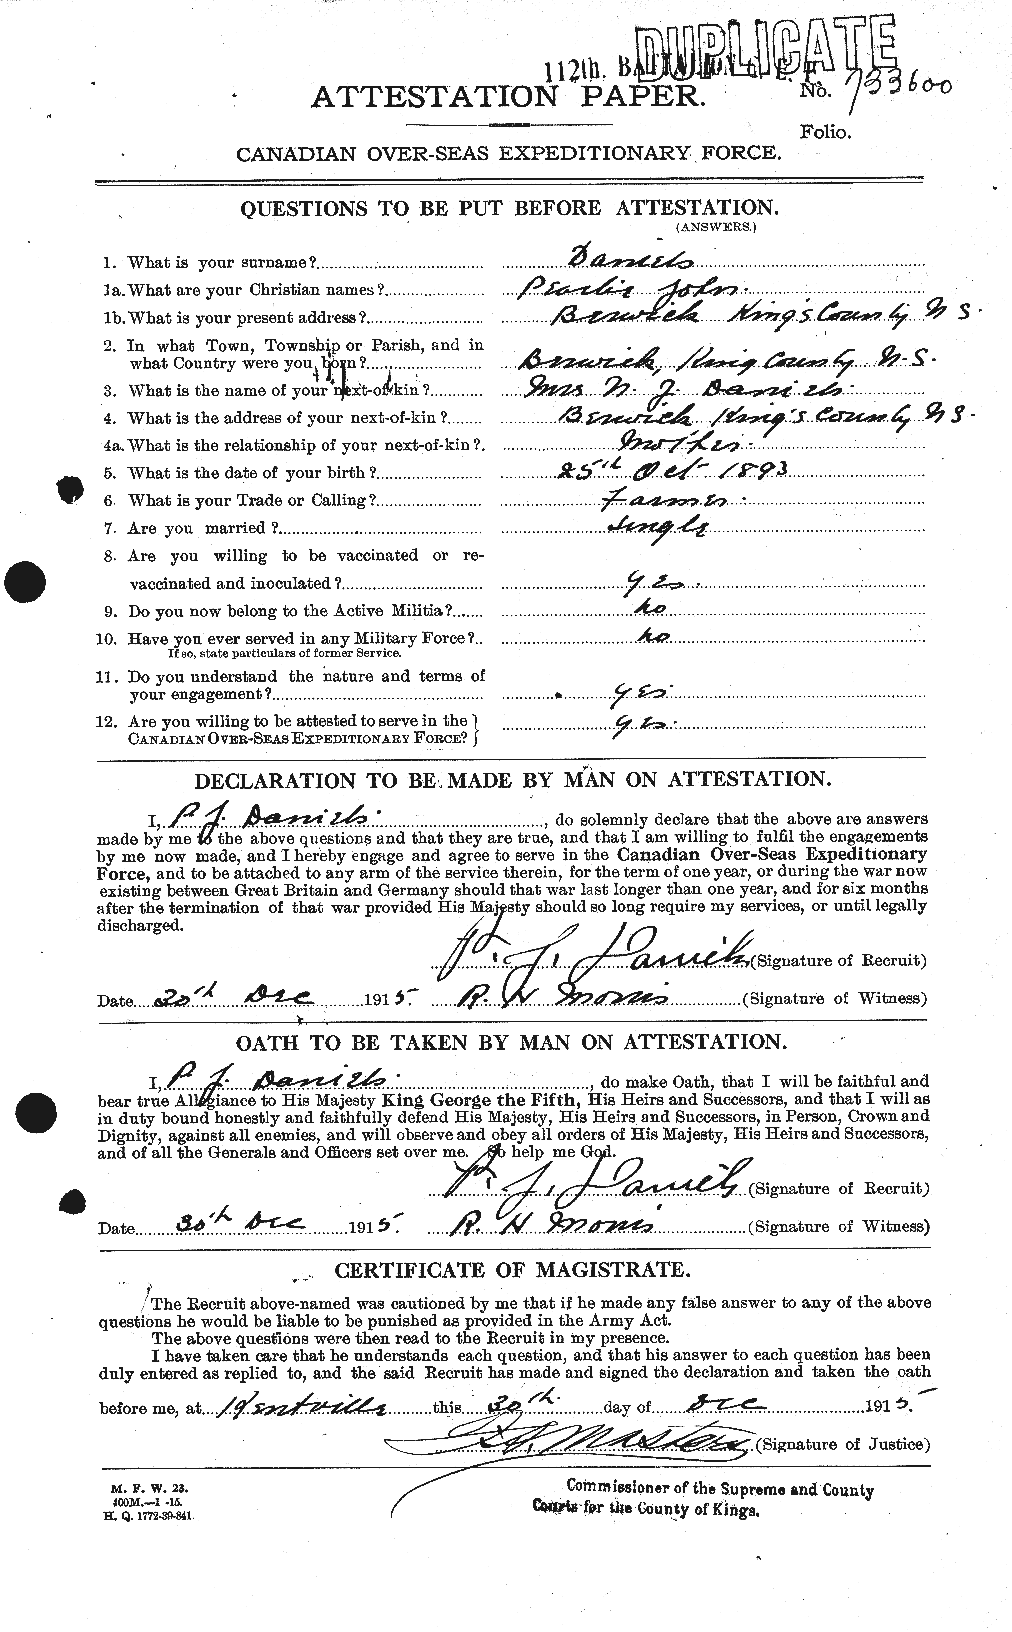 Personnel Records of the First World War - CEF 279659a